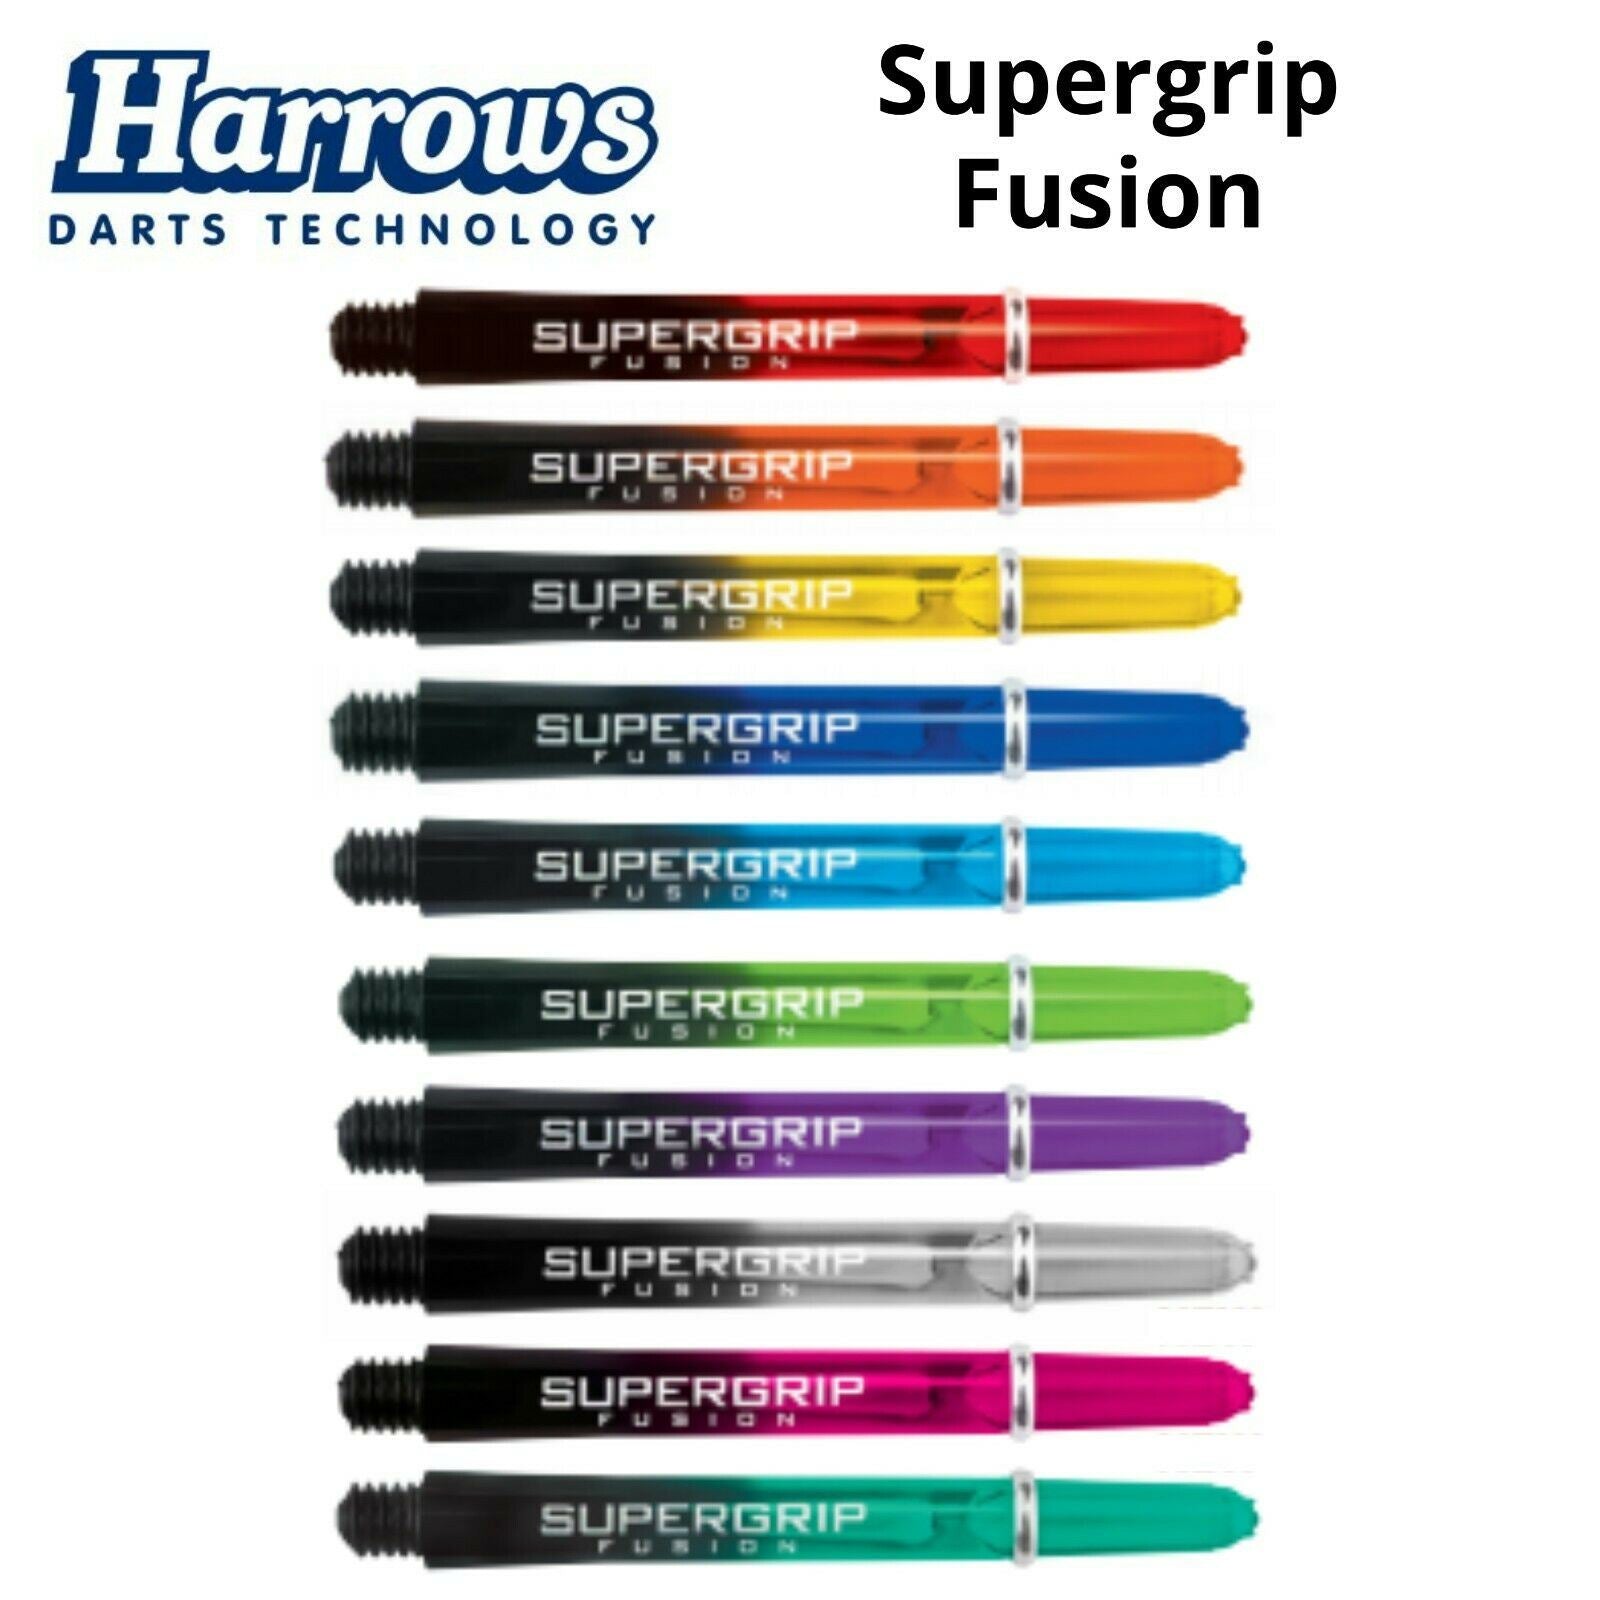 Harrows Supergrip Fusion Shafts with ring